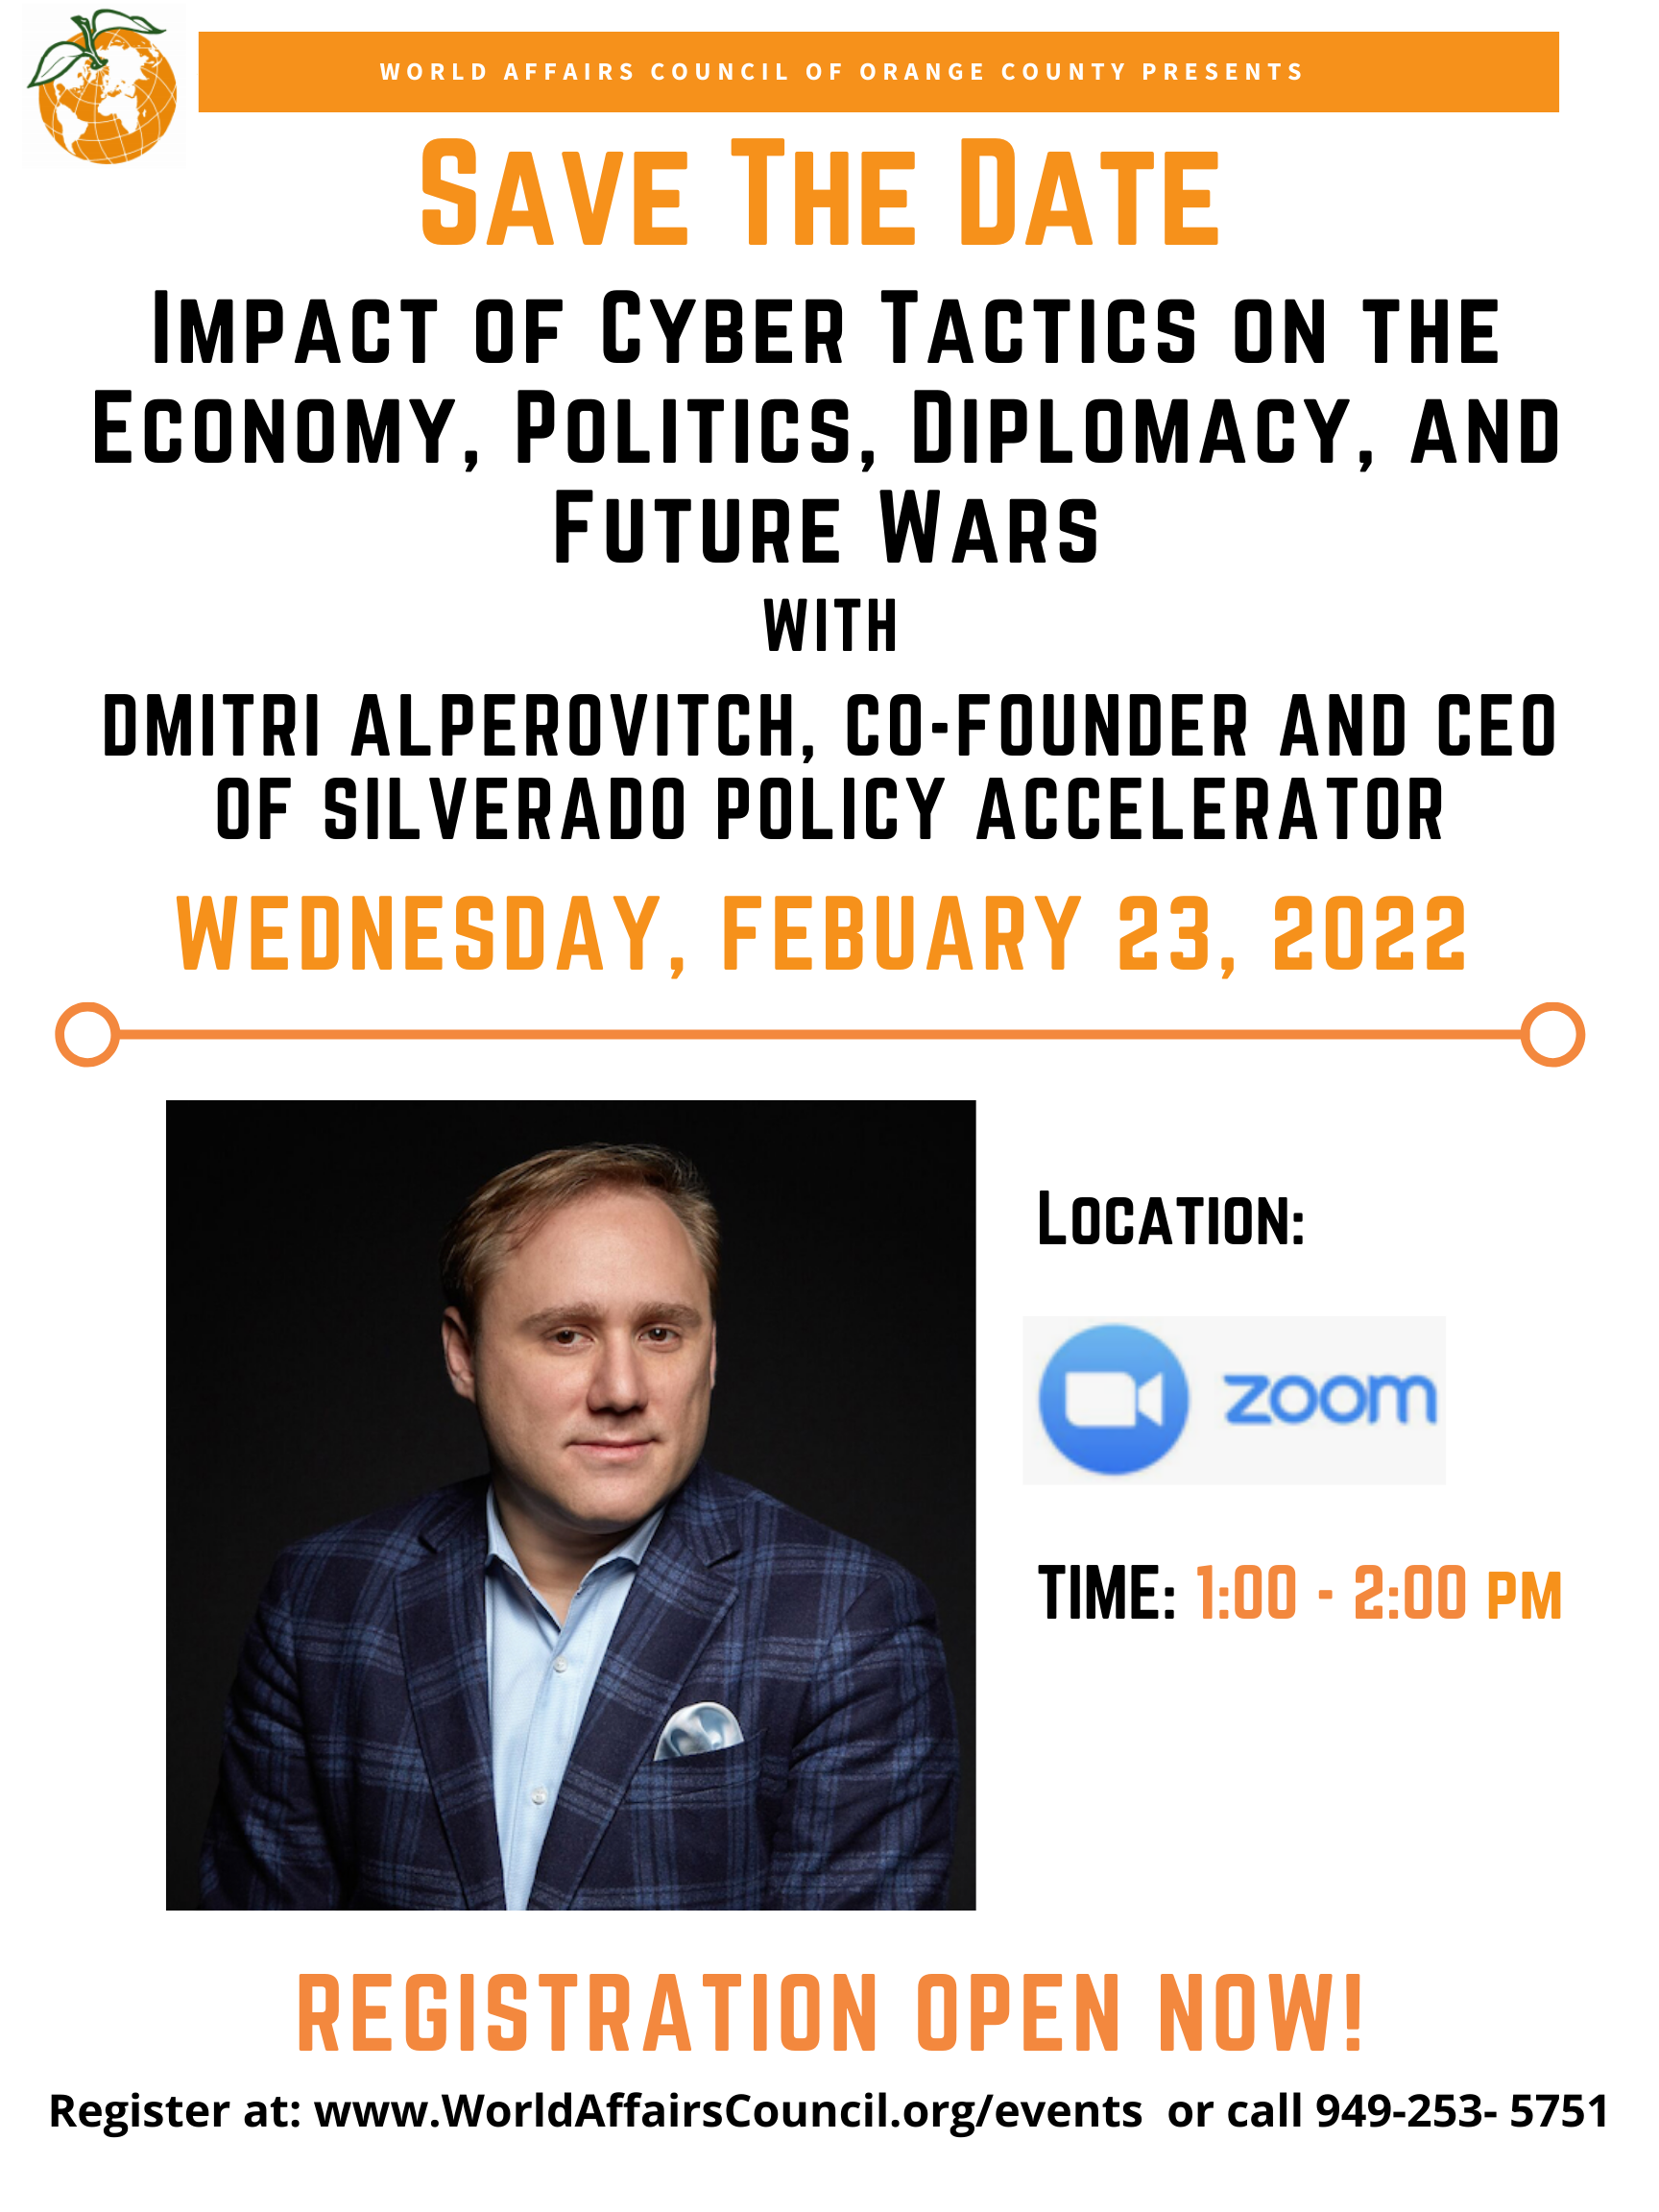 "Impact of Cyber Tactics on the Economy, Politics, Diplomacy, and Future Wars" with Dmitri Alperovitch, Co-Founder and CEO of Silverado Policy Accelerator